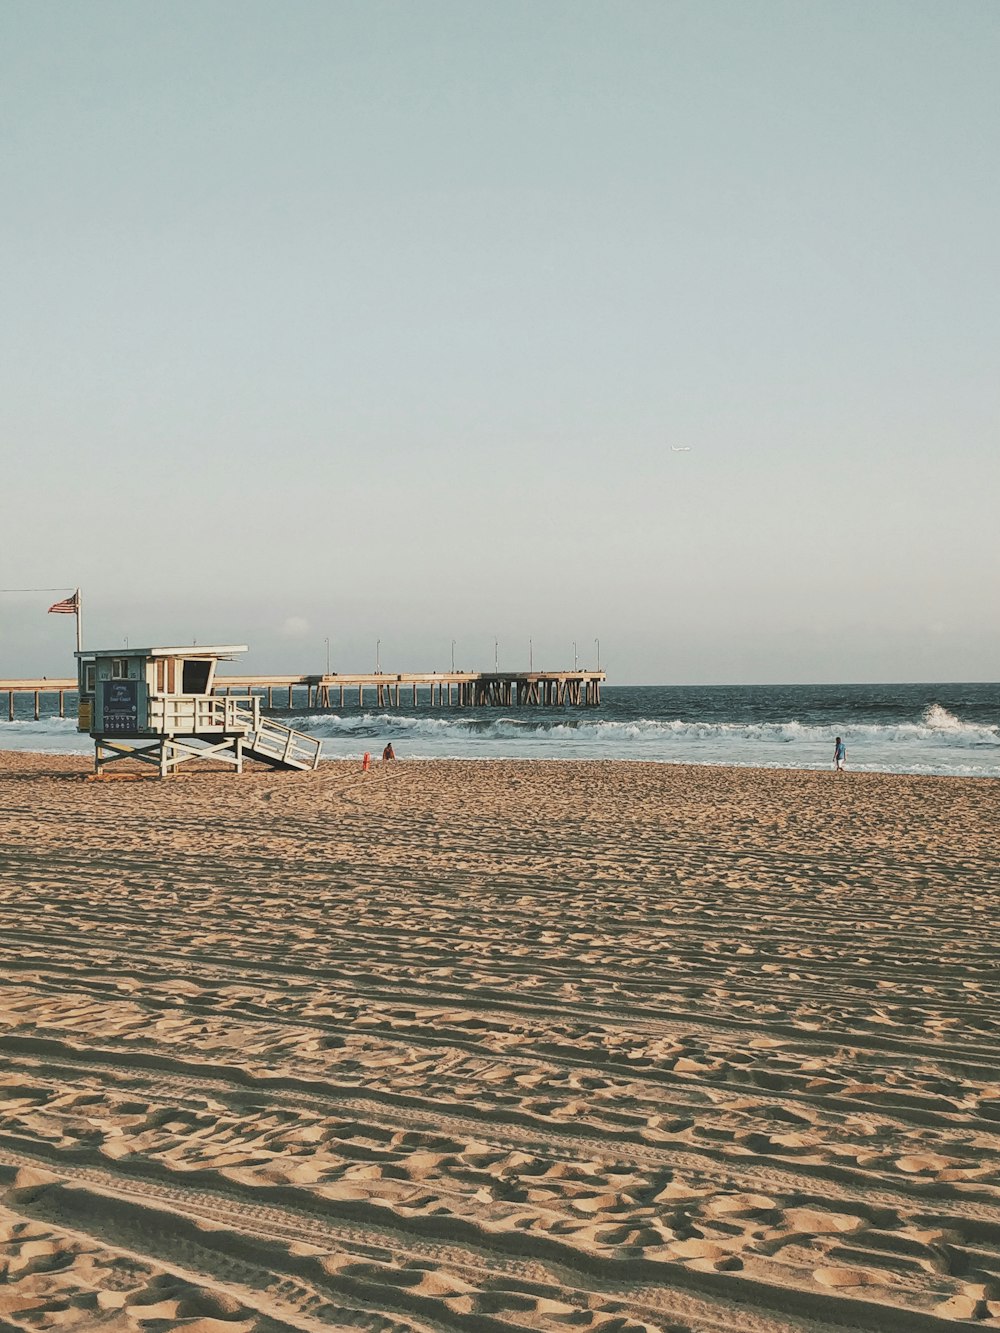 white wooden lifeguard house on beach during daytime